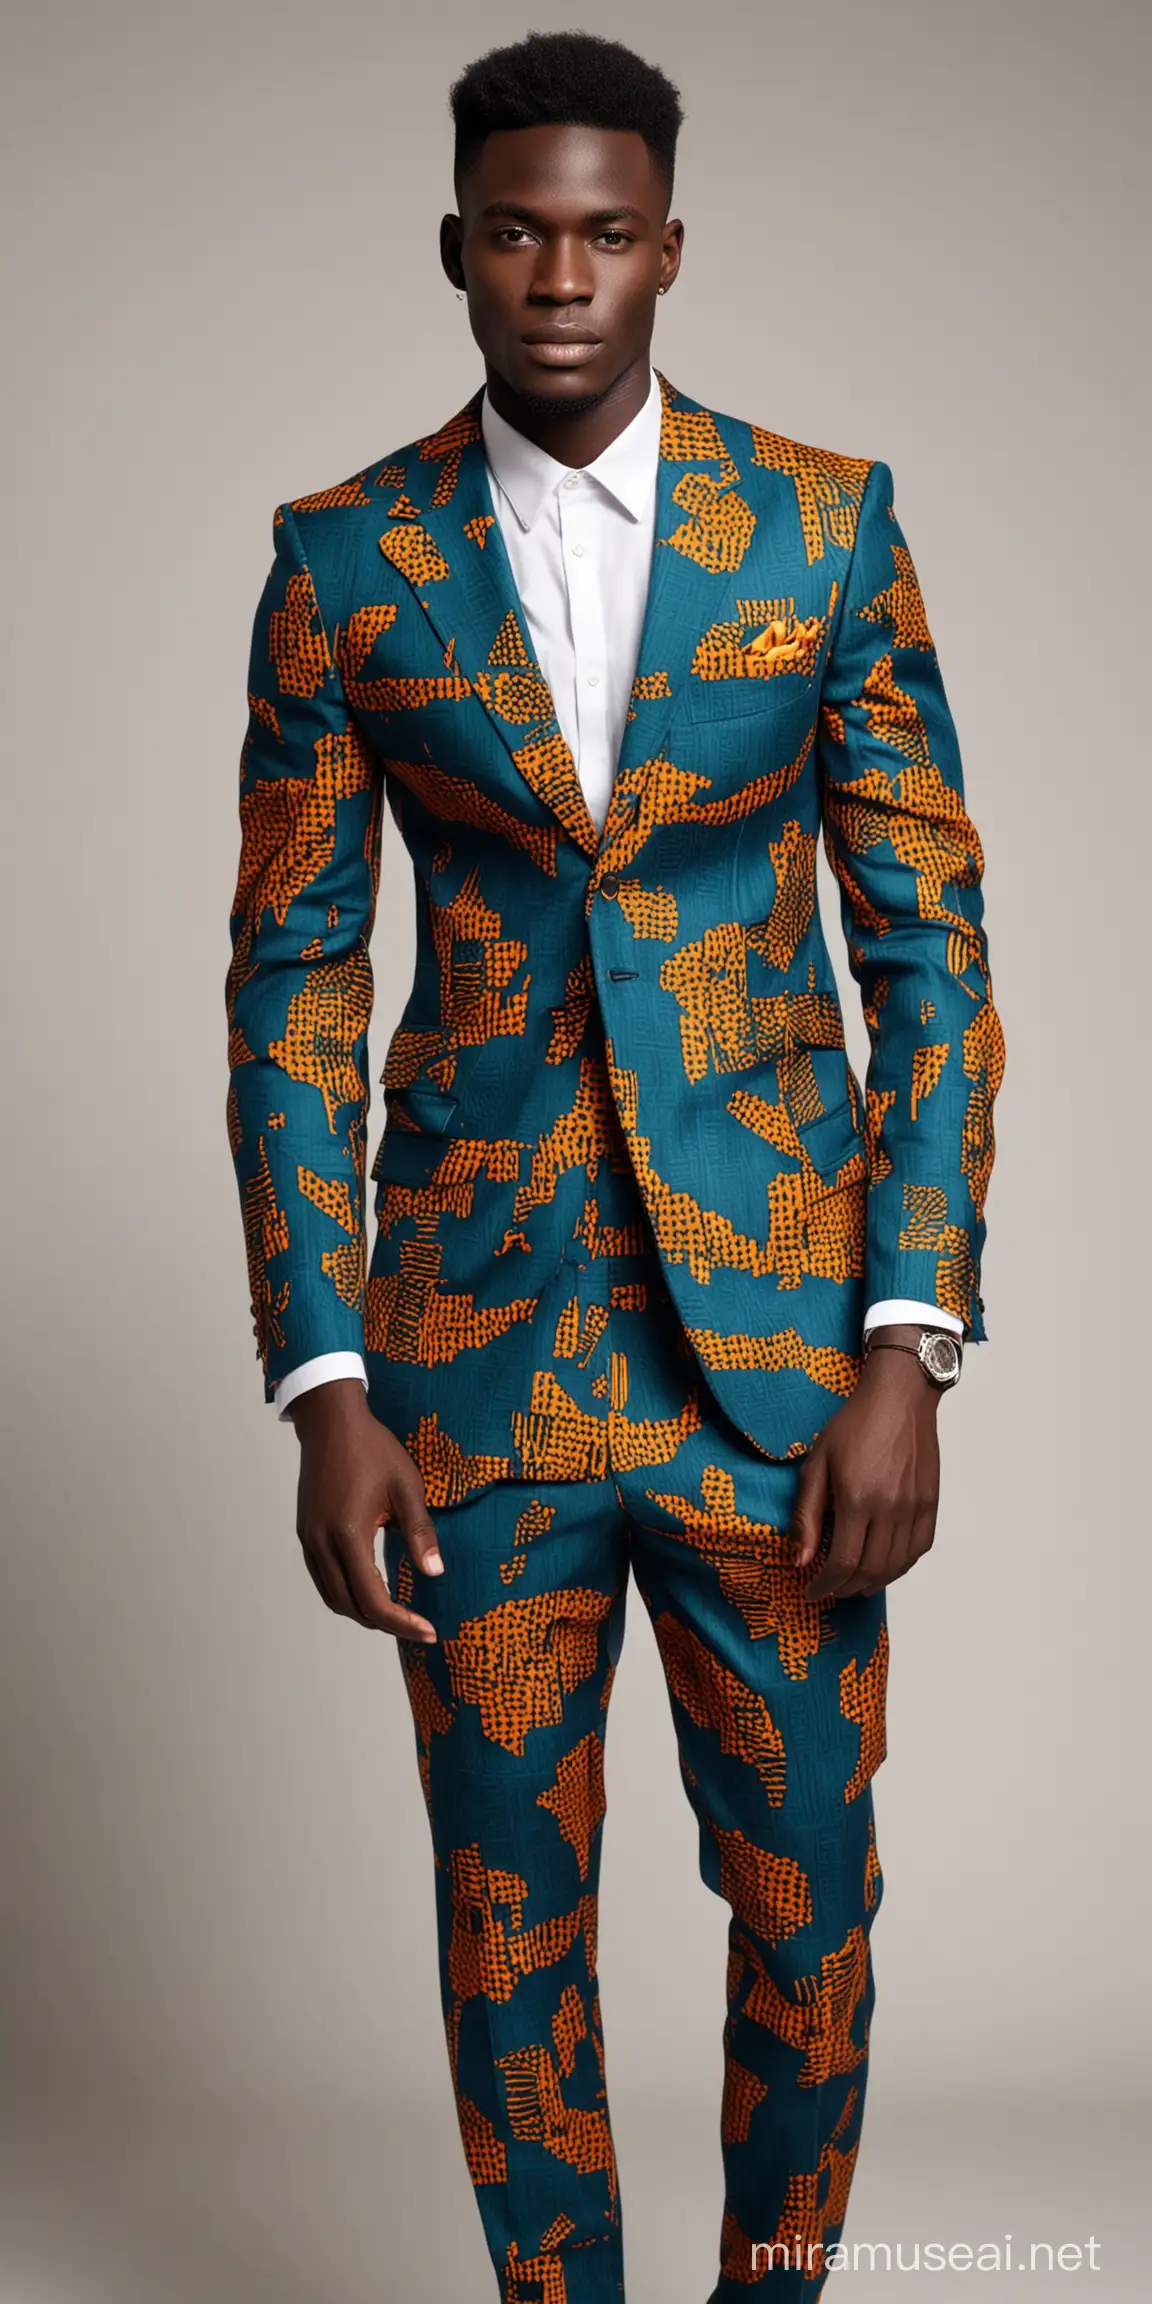 An African male model wearing a suit made with Ghanian print.